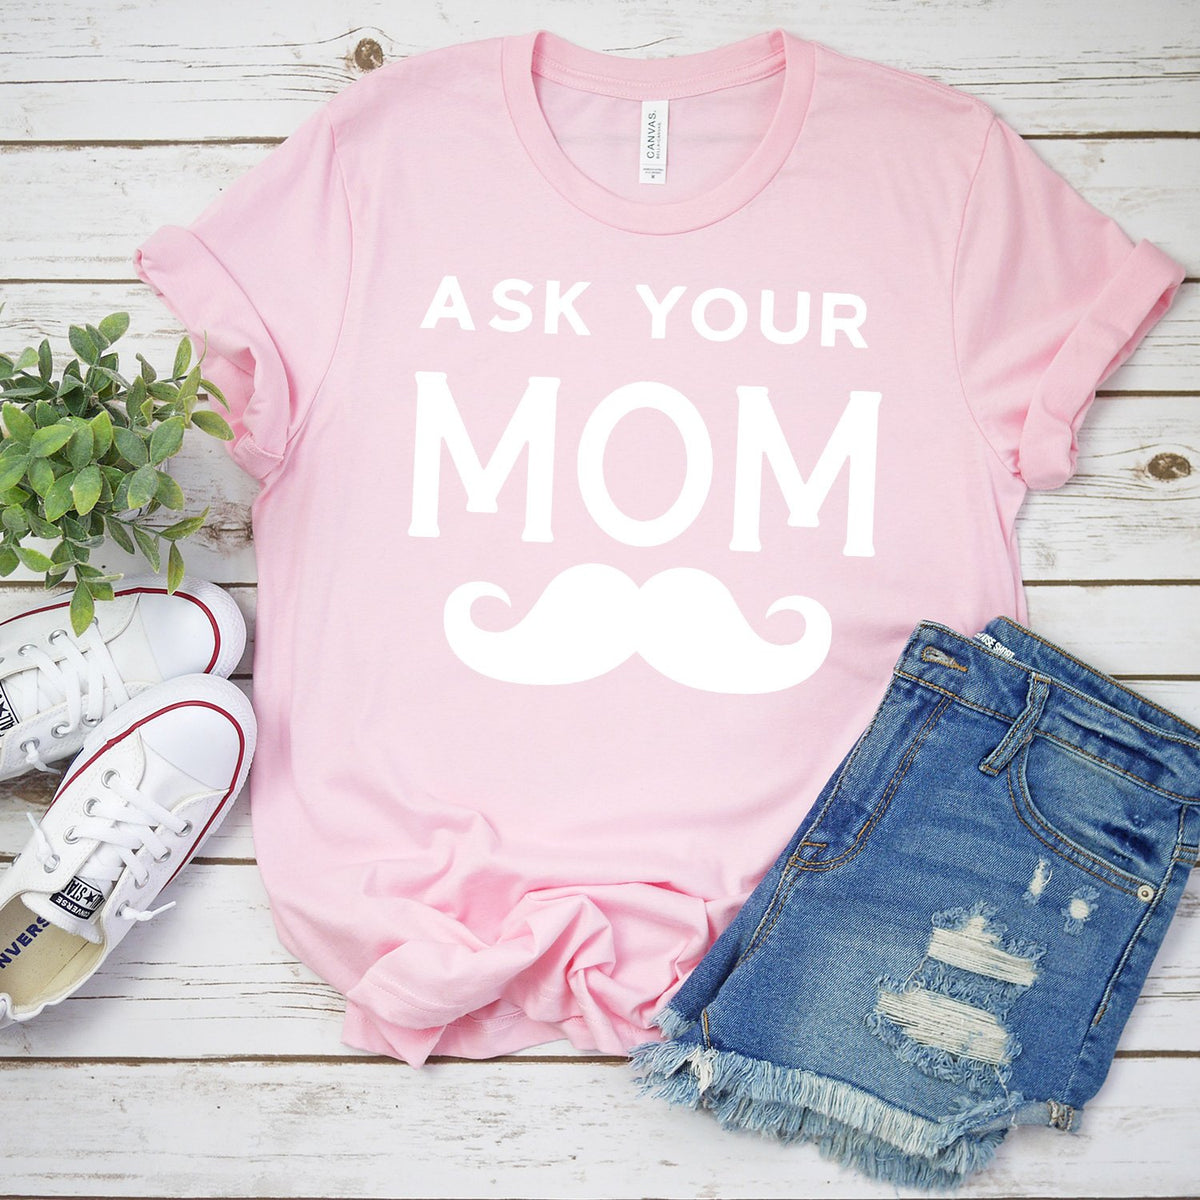 Ask Your Mom with Mustache - Short Sleeve Tee Shirt